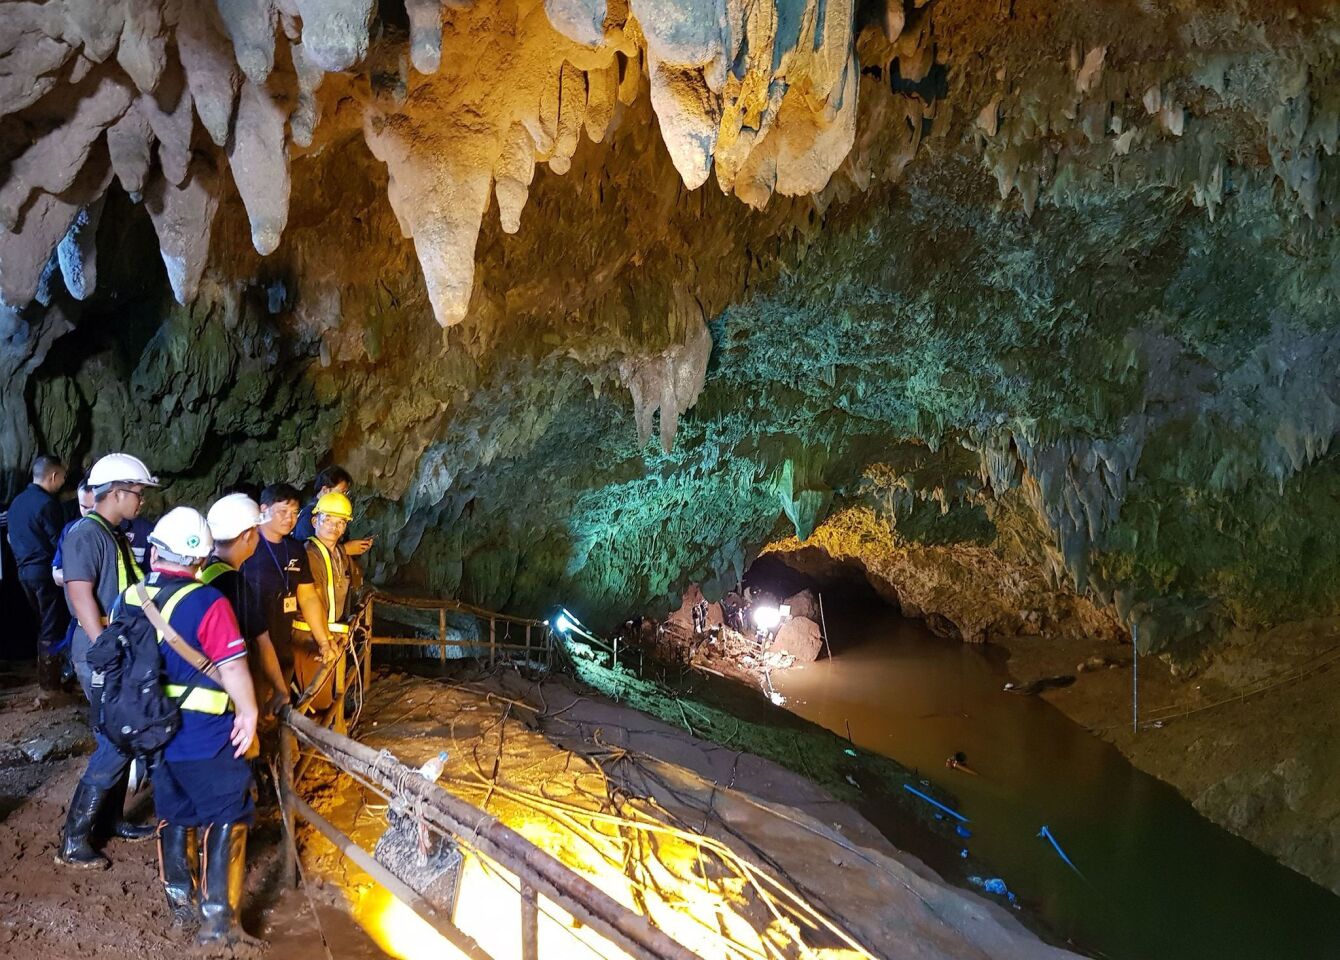 Thai workers attempt to drain the water from the cave during the search and rescue operation.